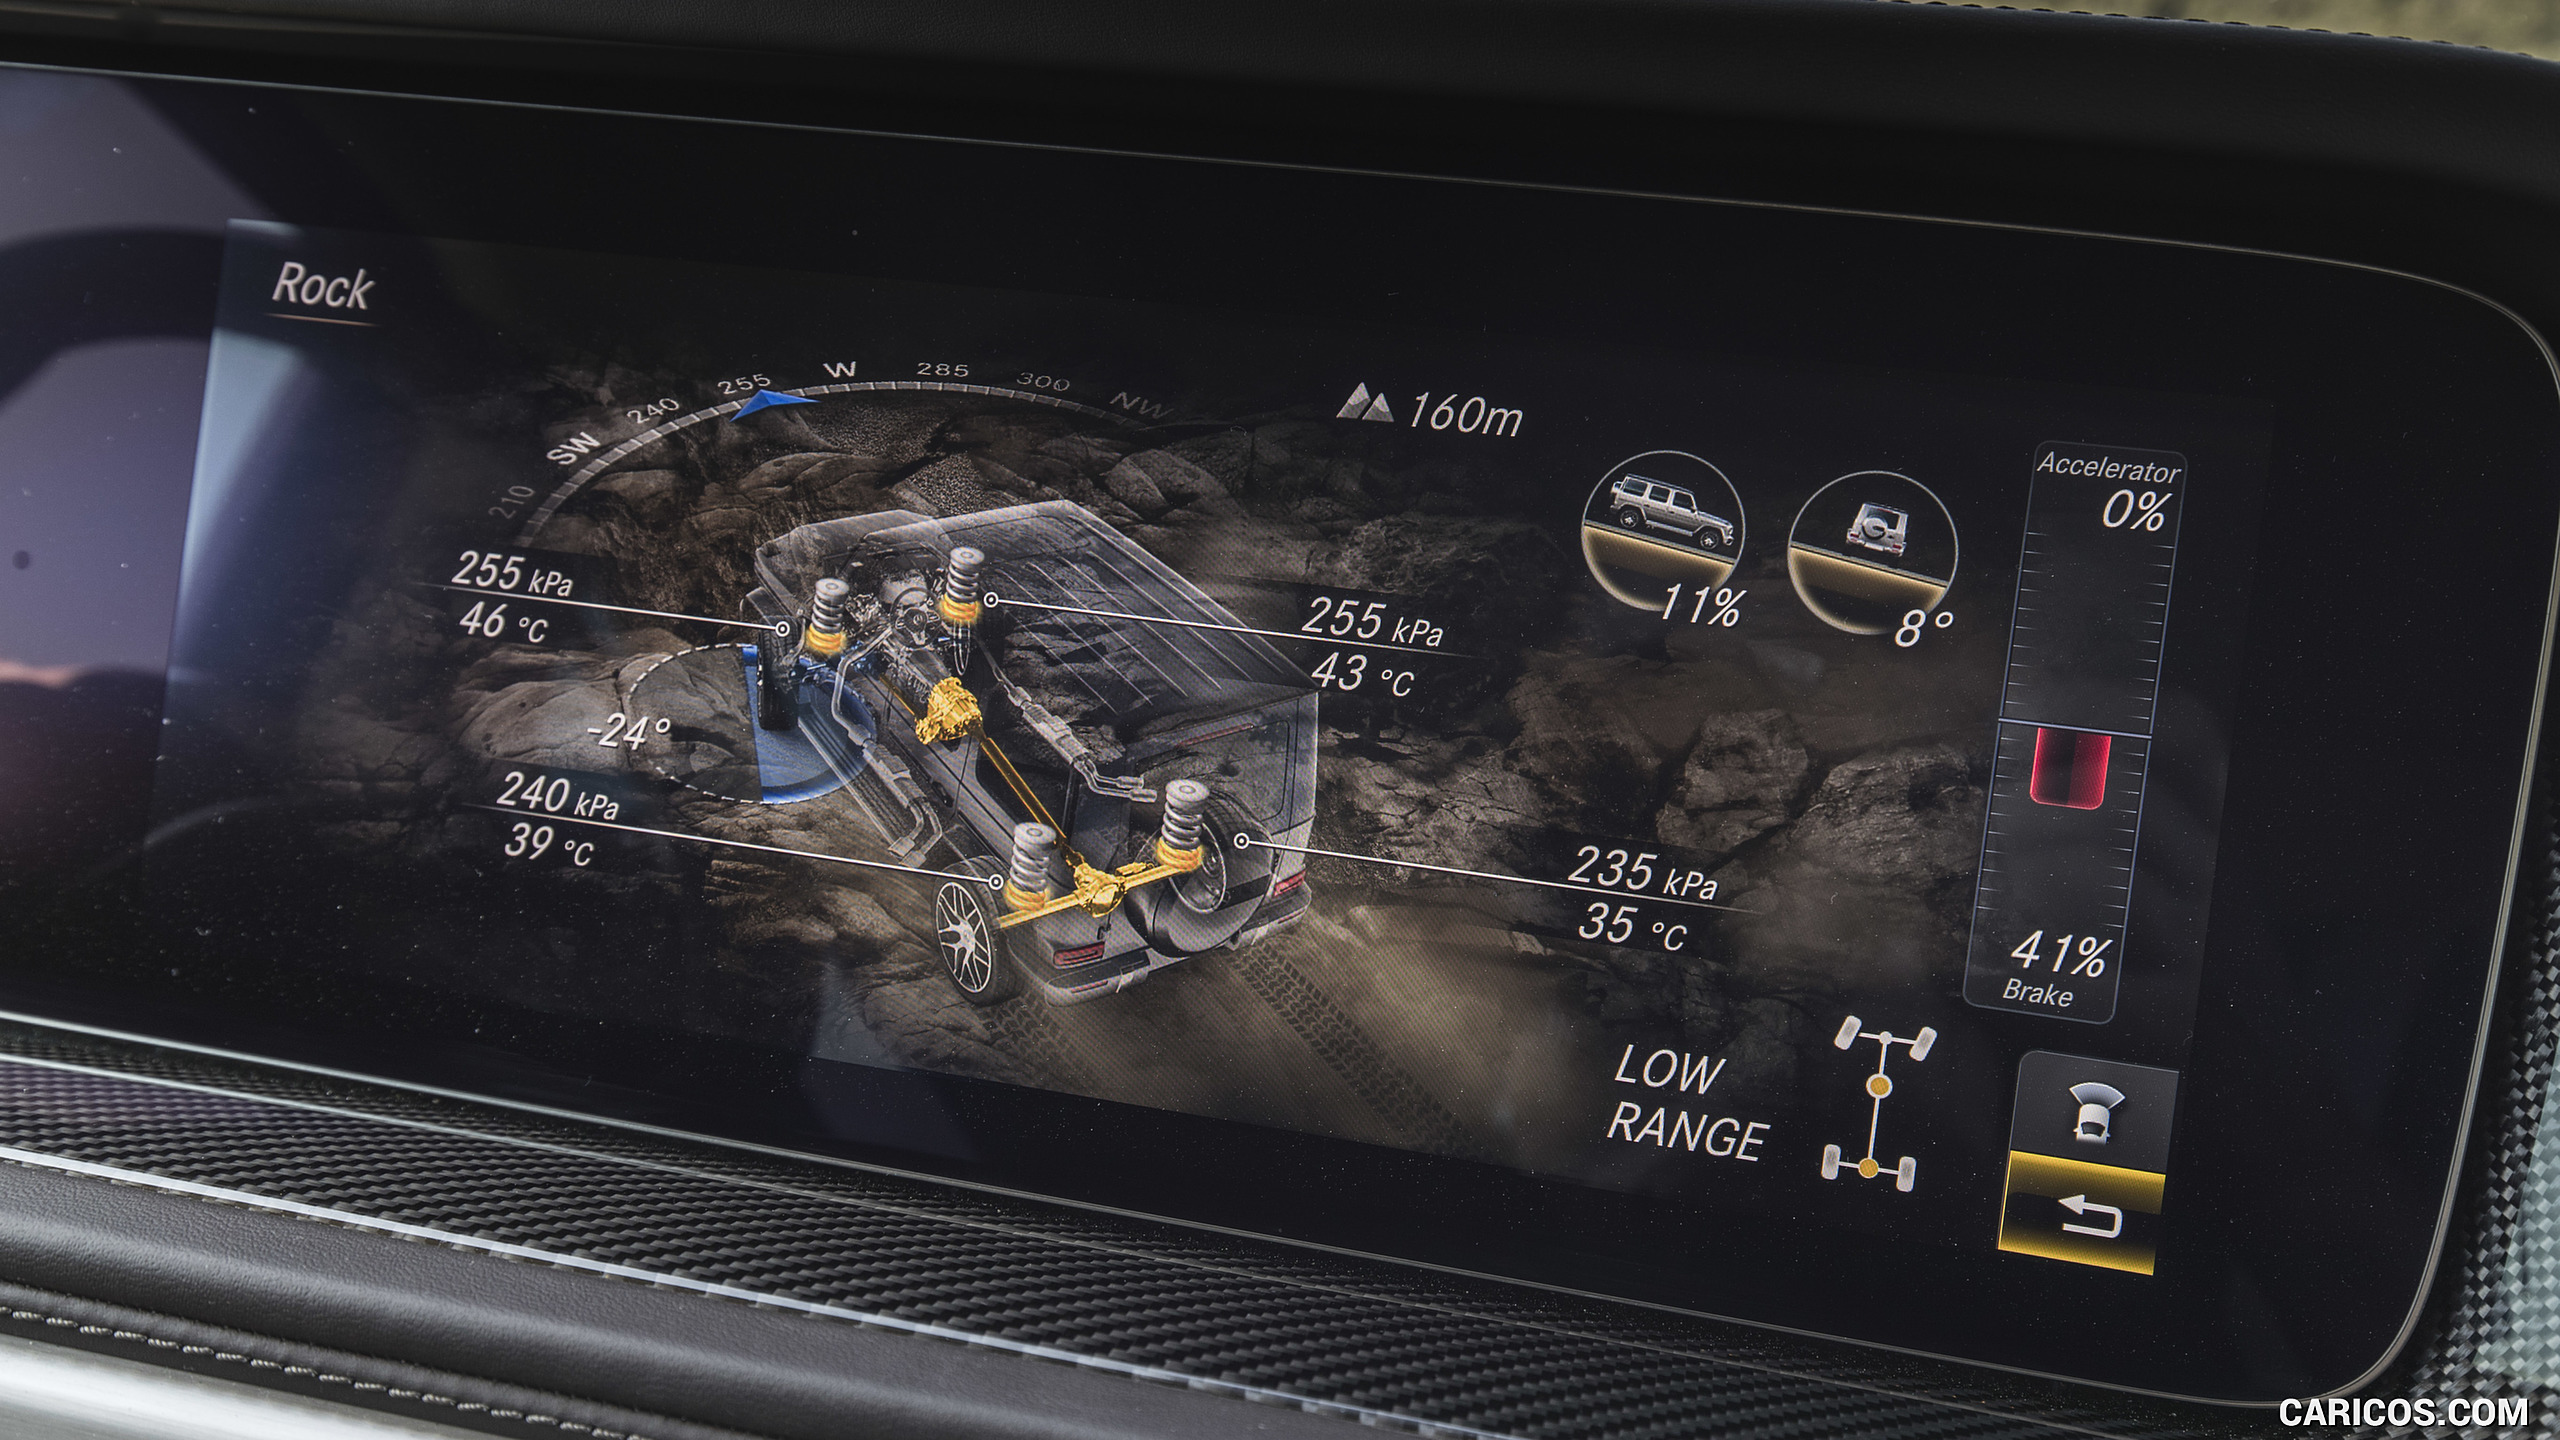 2019 Mercedes-AMG G63 - Central Console, #215 of 452